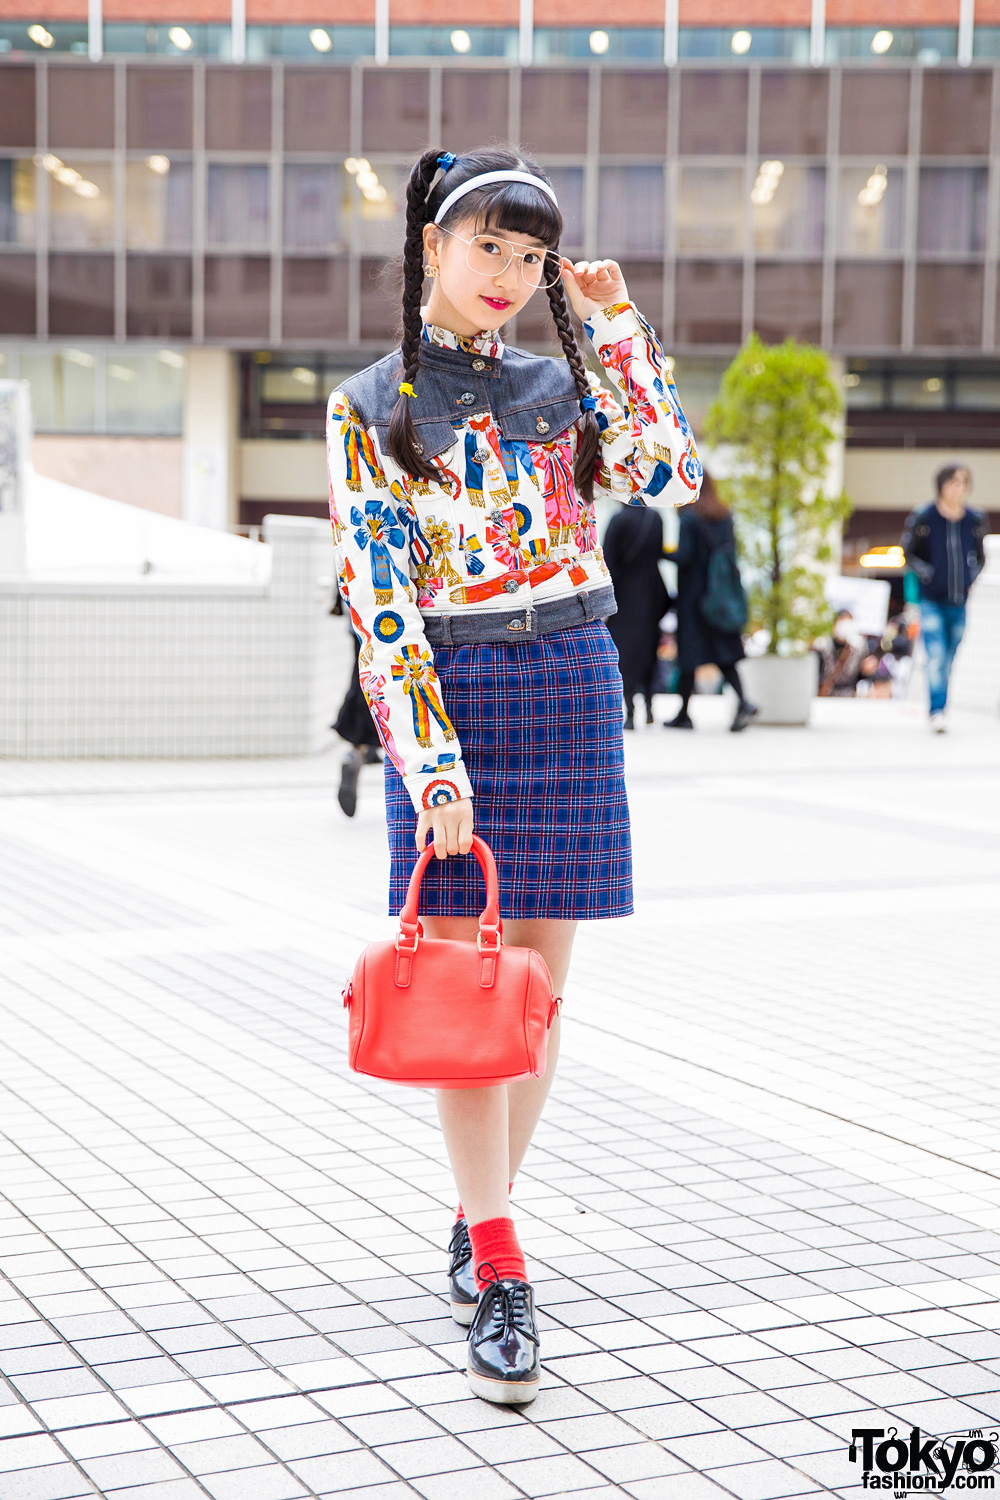 Japanese Model/Actress A-Pon in Vintage Mixed Prints Street Style